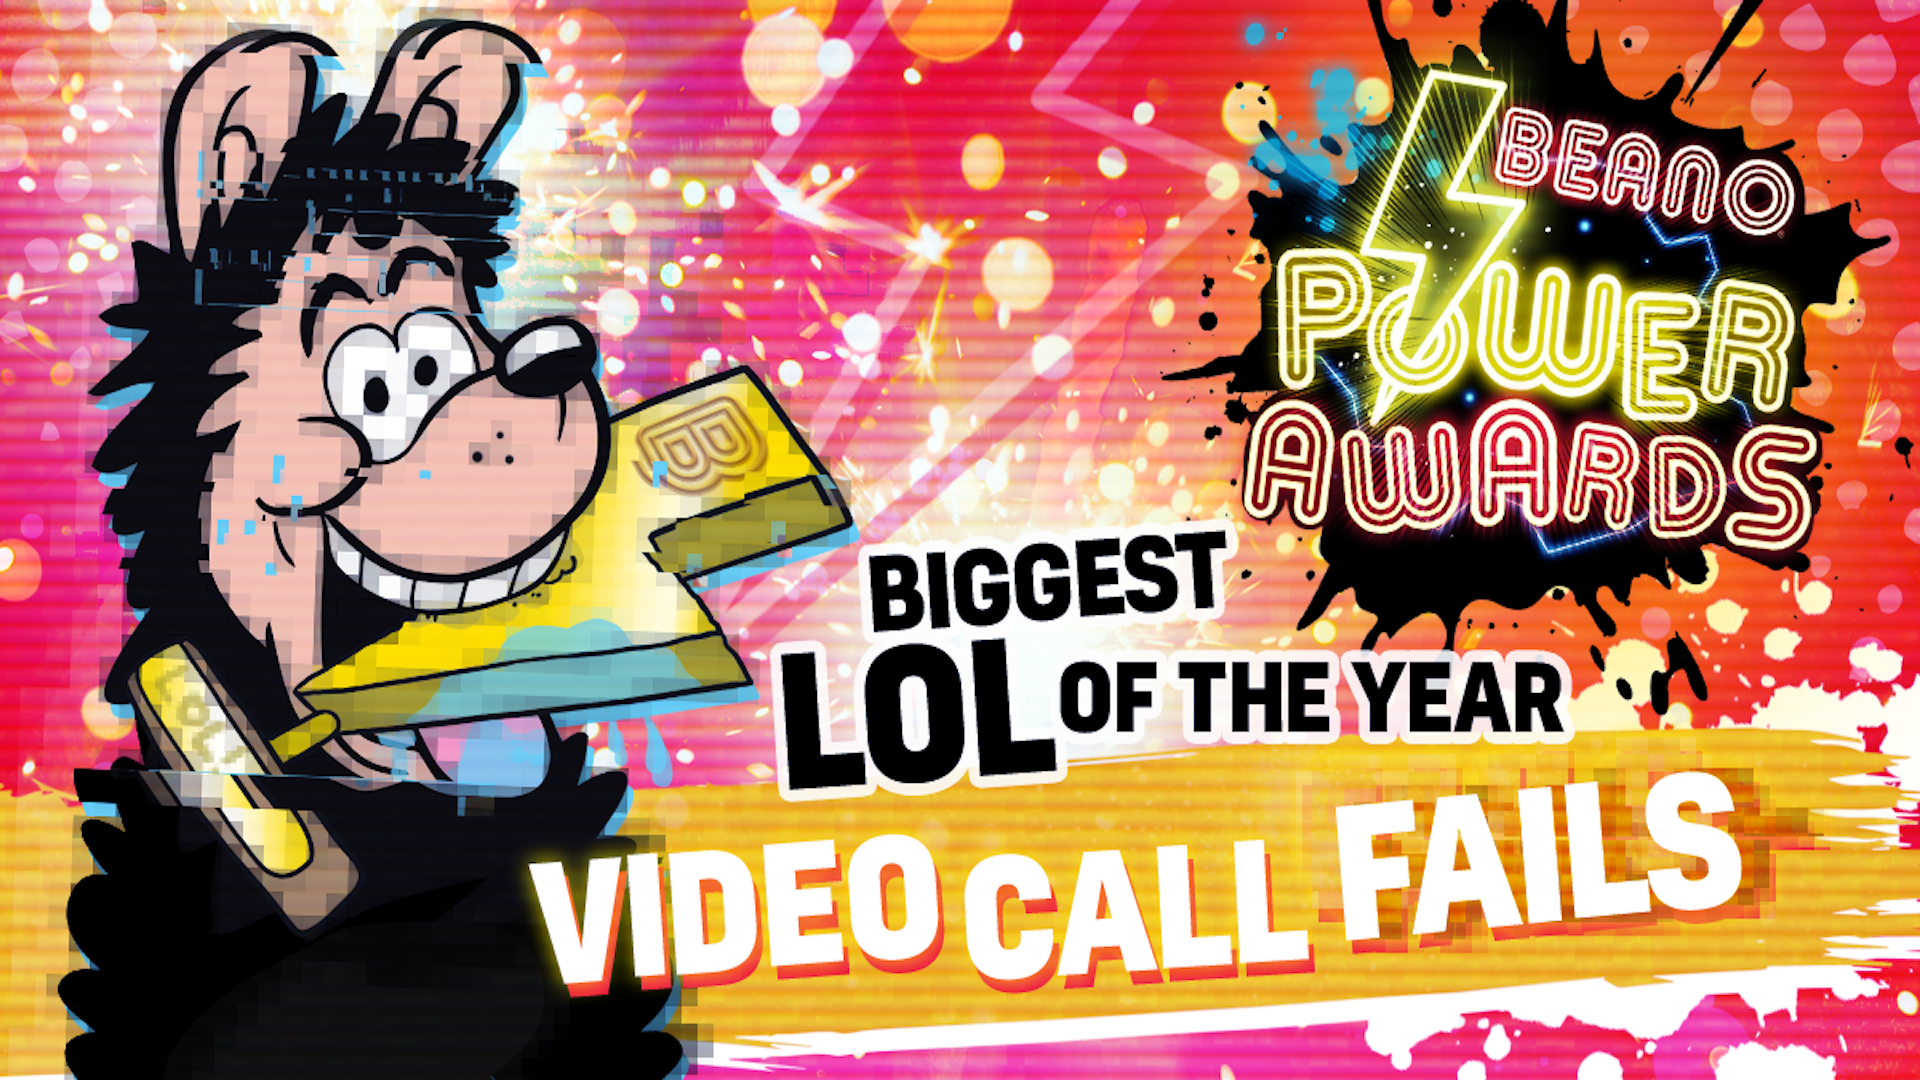 Biggest LOL of the Year: Beano Power Awards